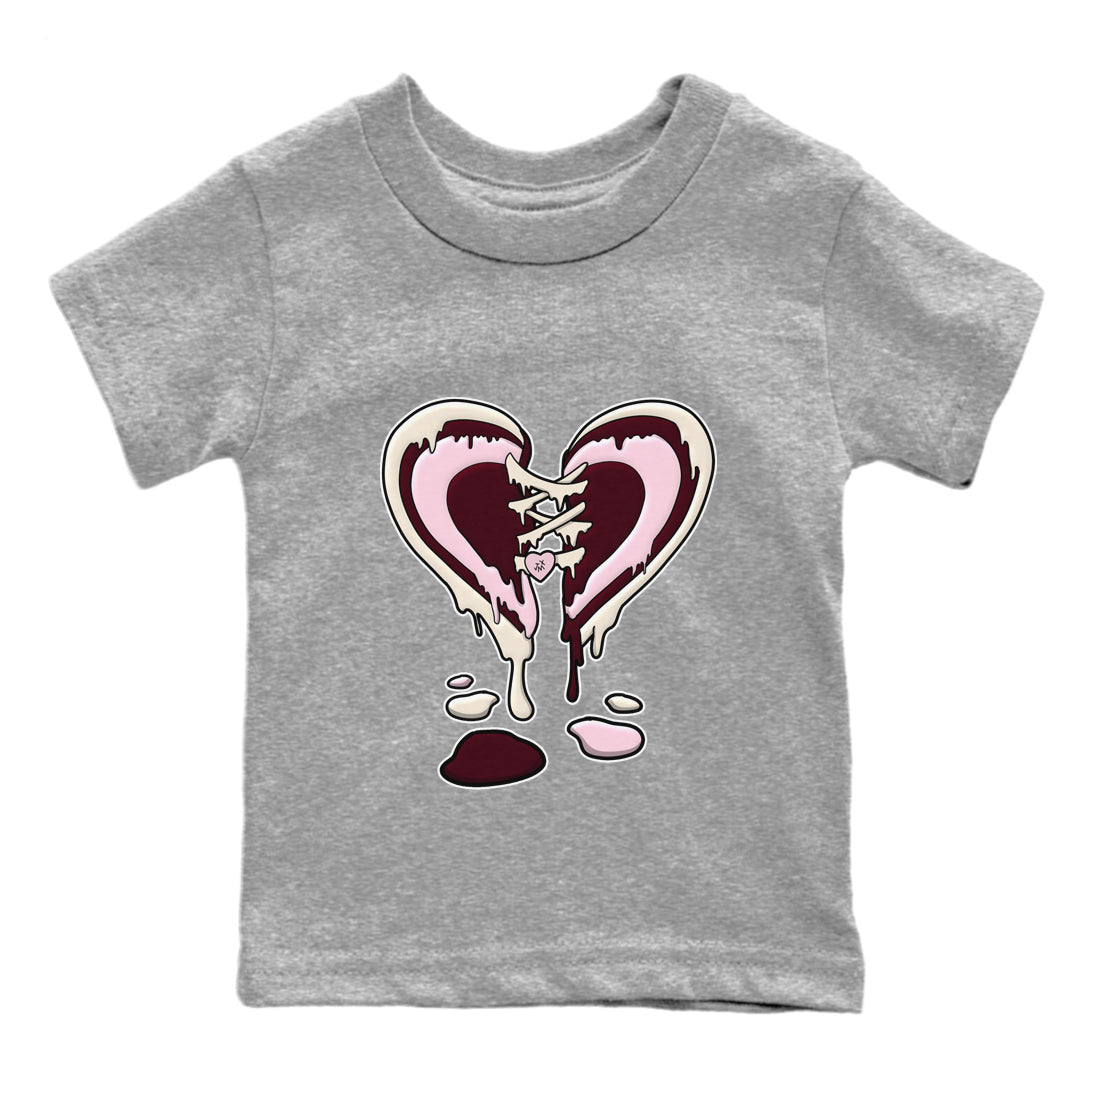 Dunk Valentines Day Sneaker Match Tees Melting Heart Sneaker Tees Nike Dunk Valentine's Day Sneaker SNRT Sneaker Tees Kids Shirts